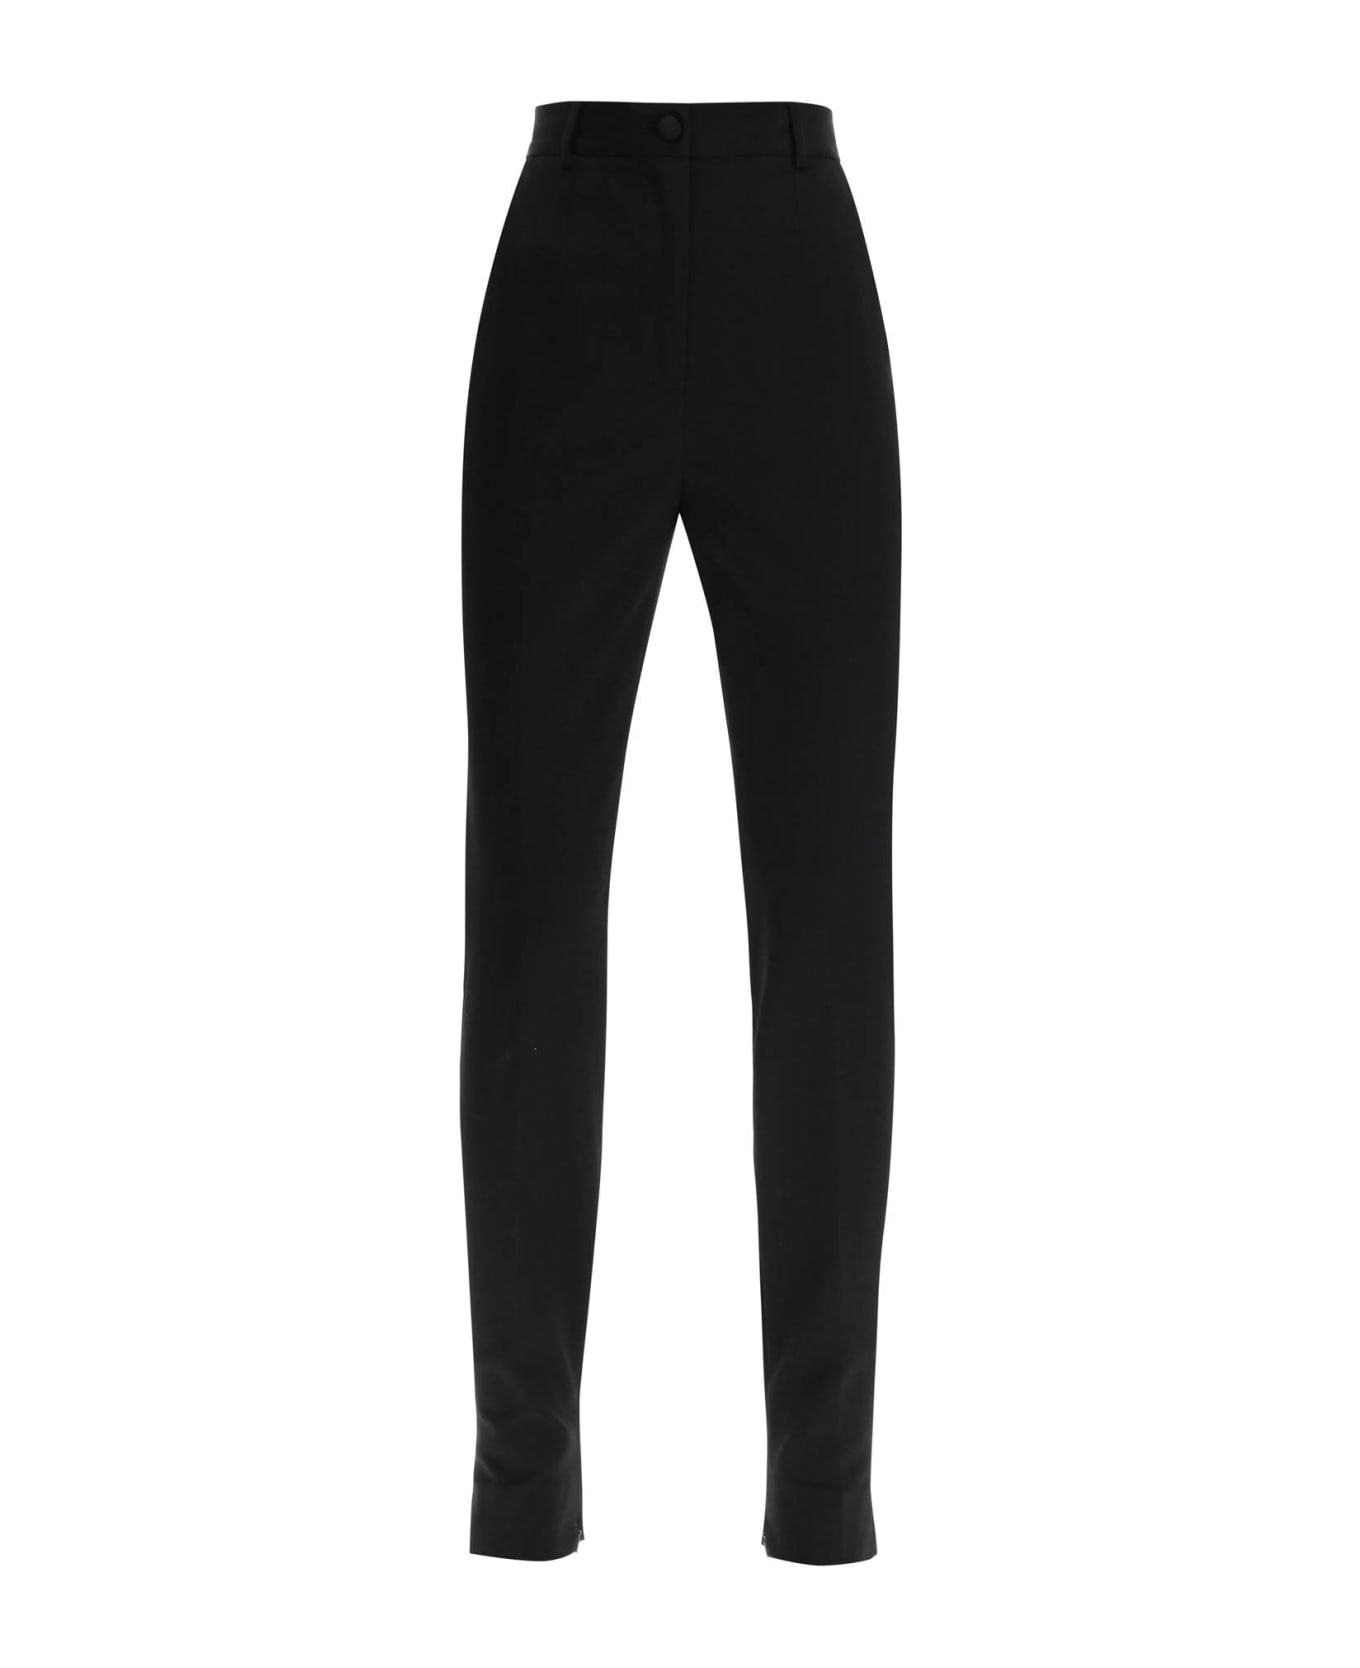 Dolce & Gabbana Slim Trousers With Zip Cuffs - black ボトムス